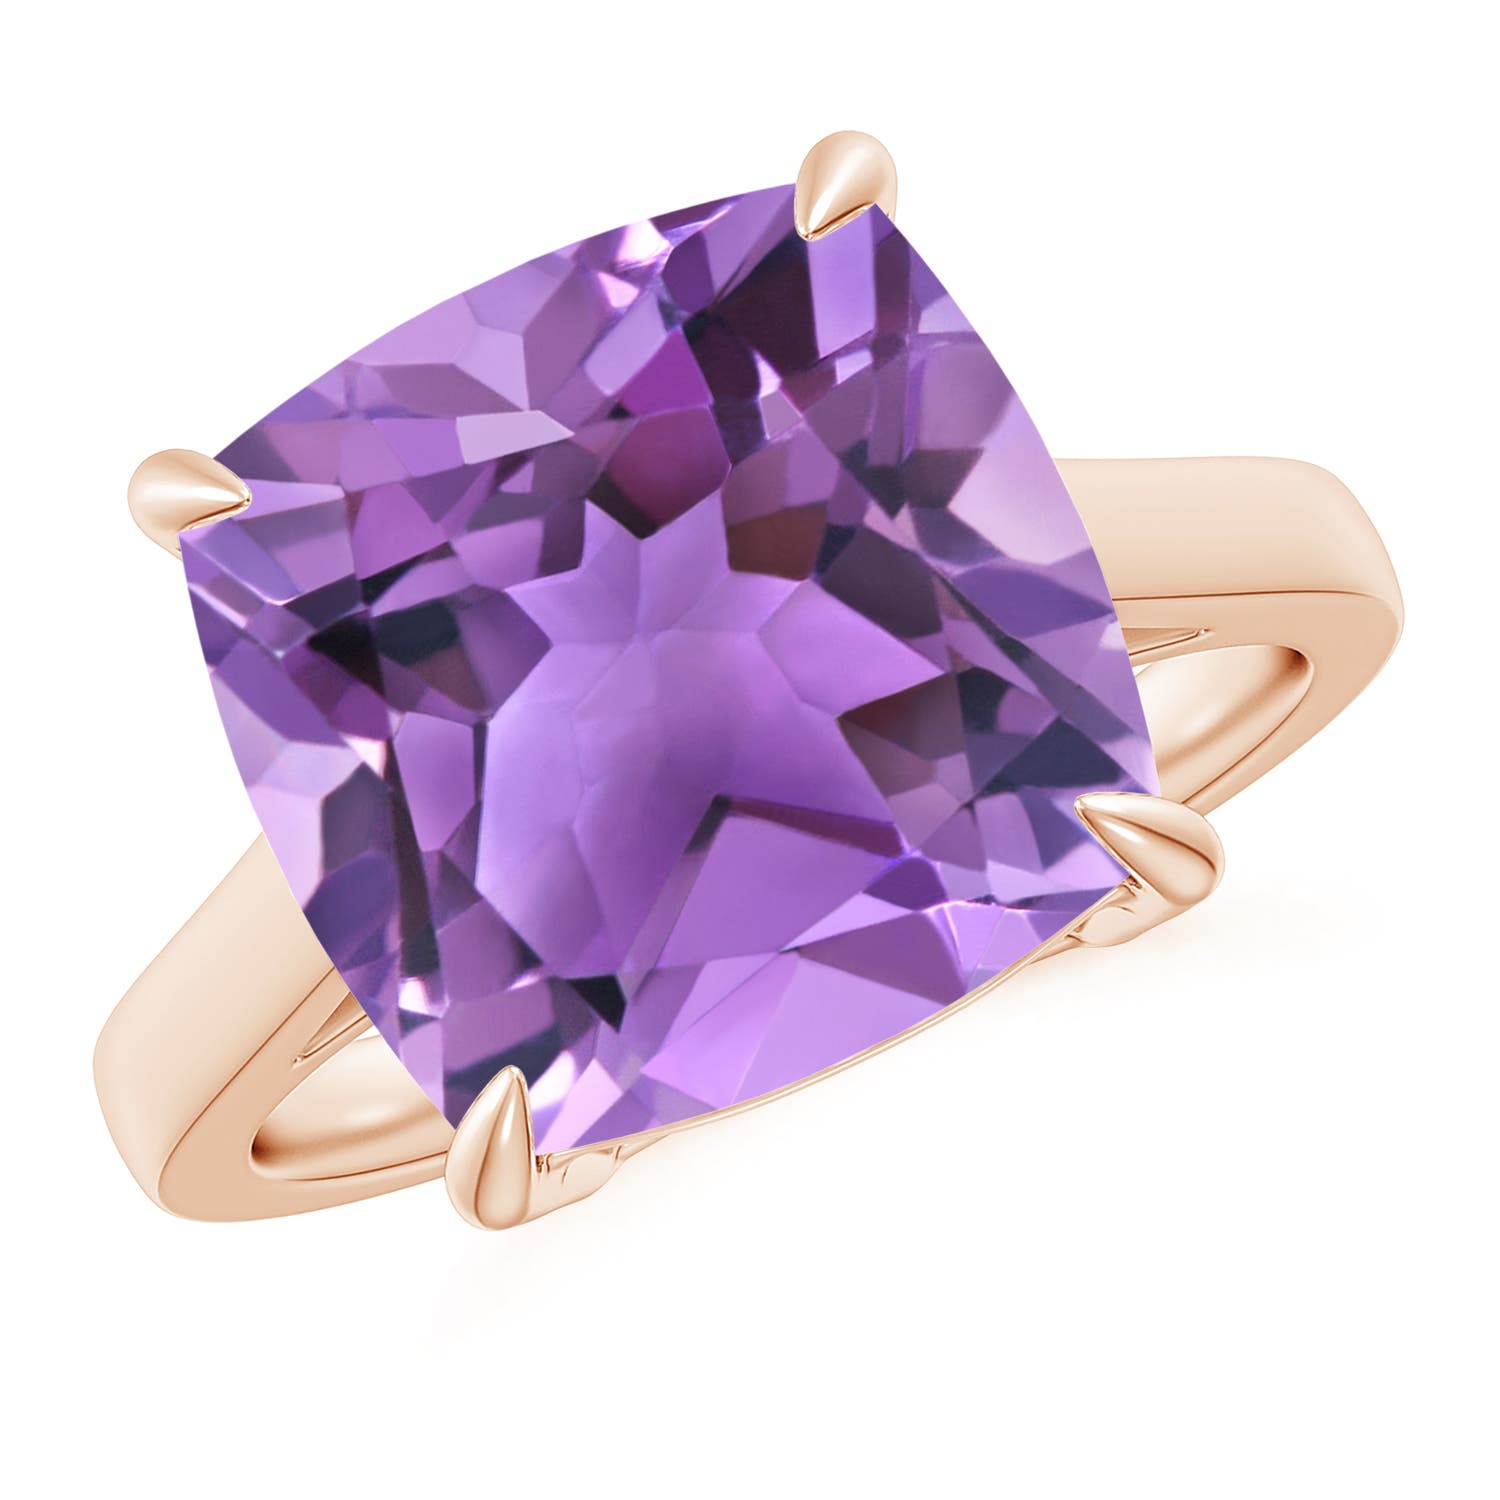 AA - Amethyst / 6.15 CT / 14 KT Rose Gold